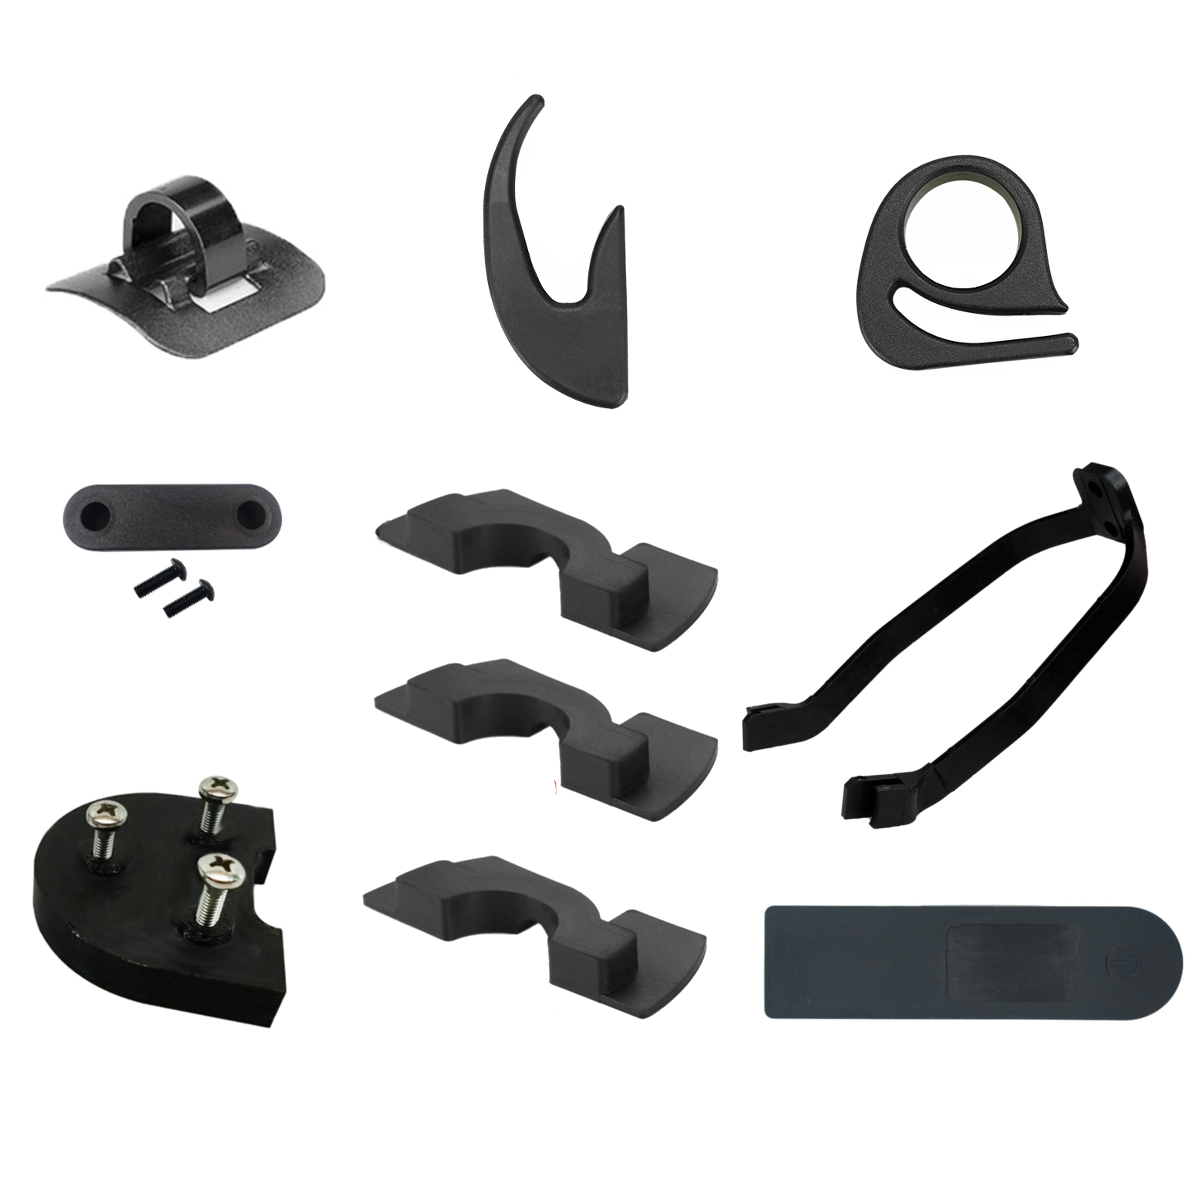 10PSC Red/Black/White Starter Kit  Scooter Accessories For Xiaomi Scooter M365/M187/PRO